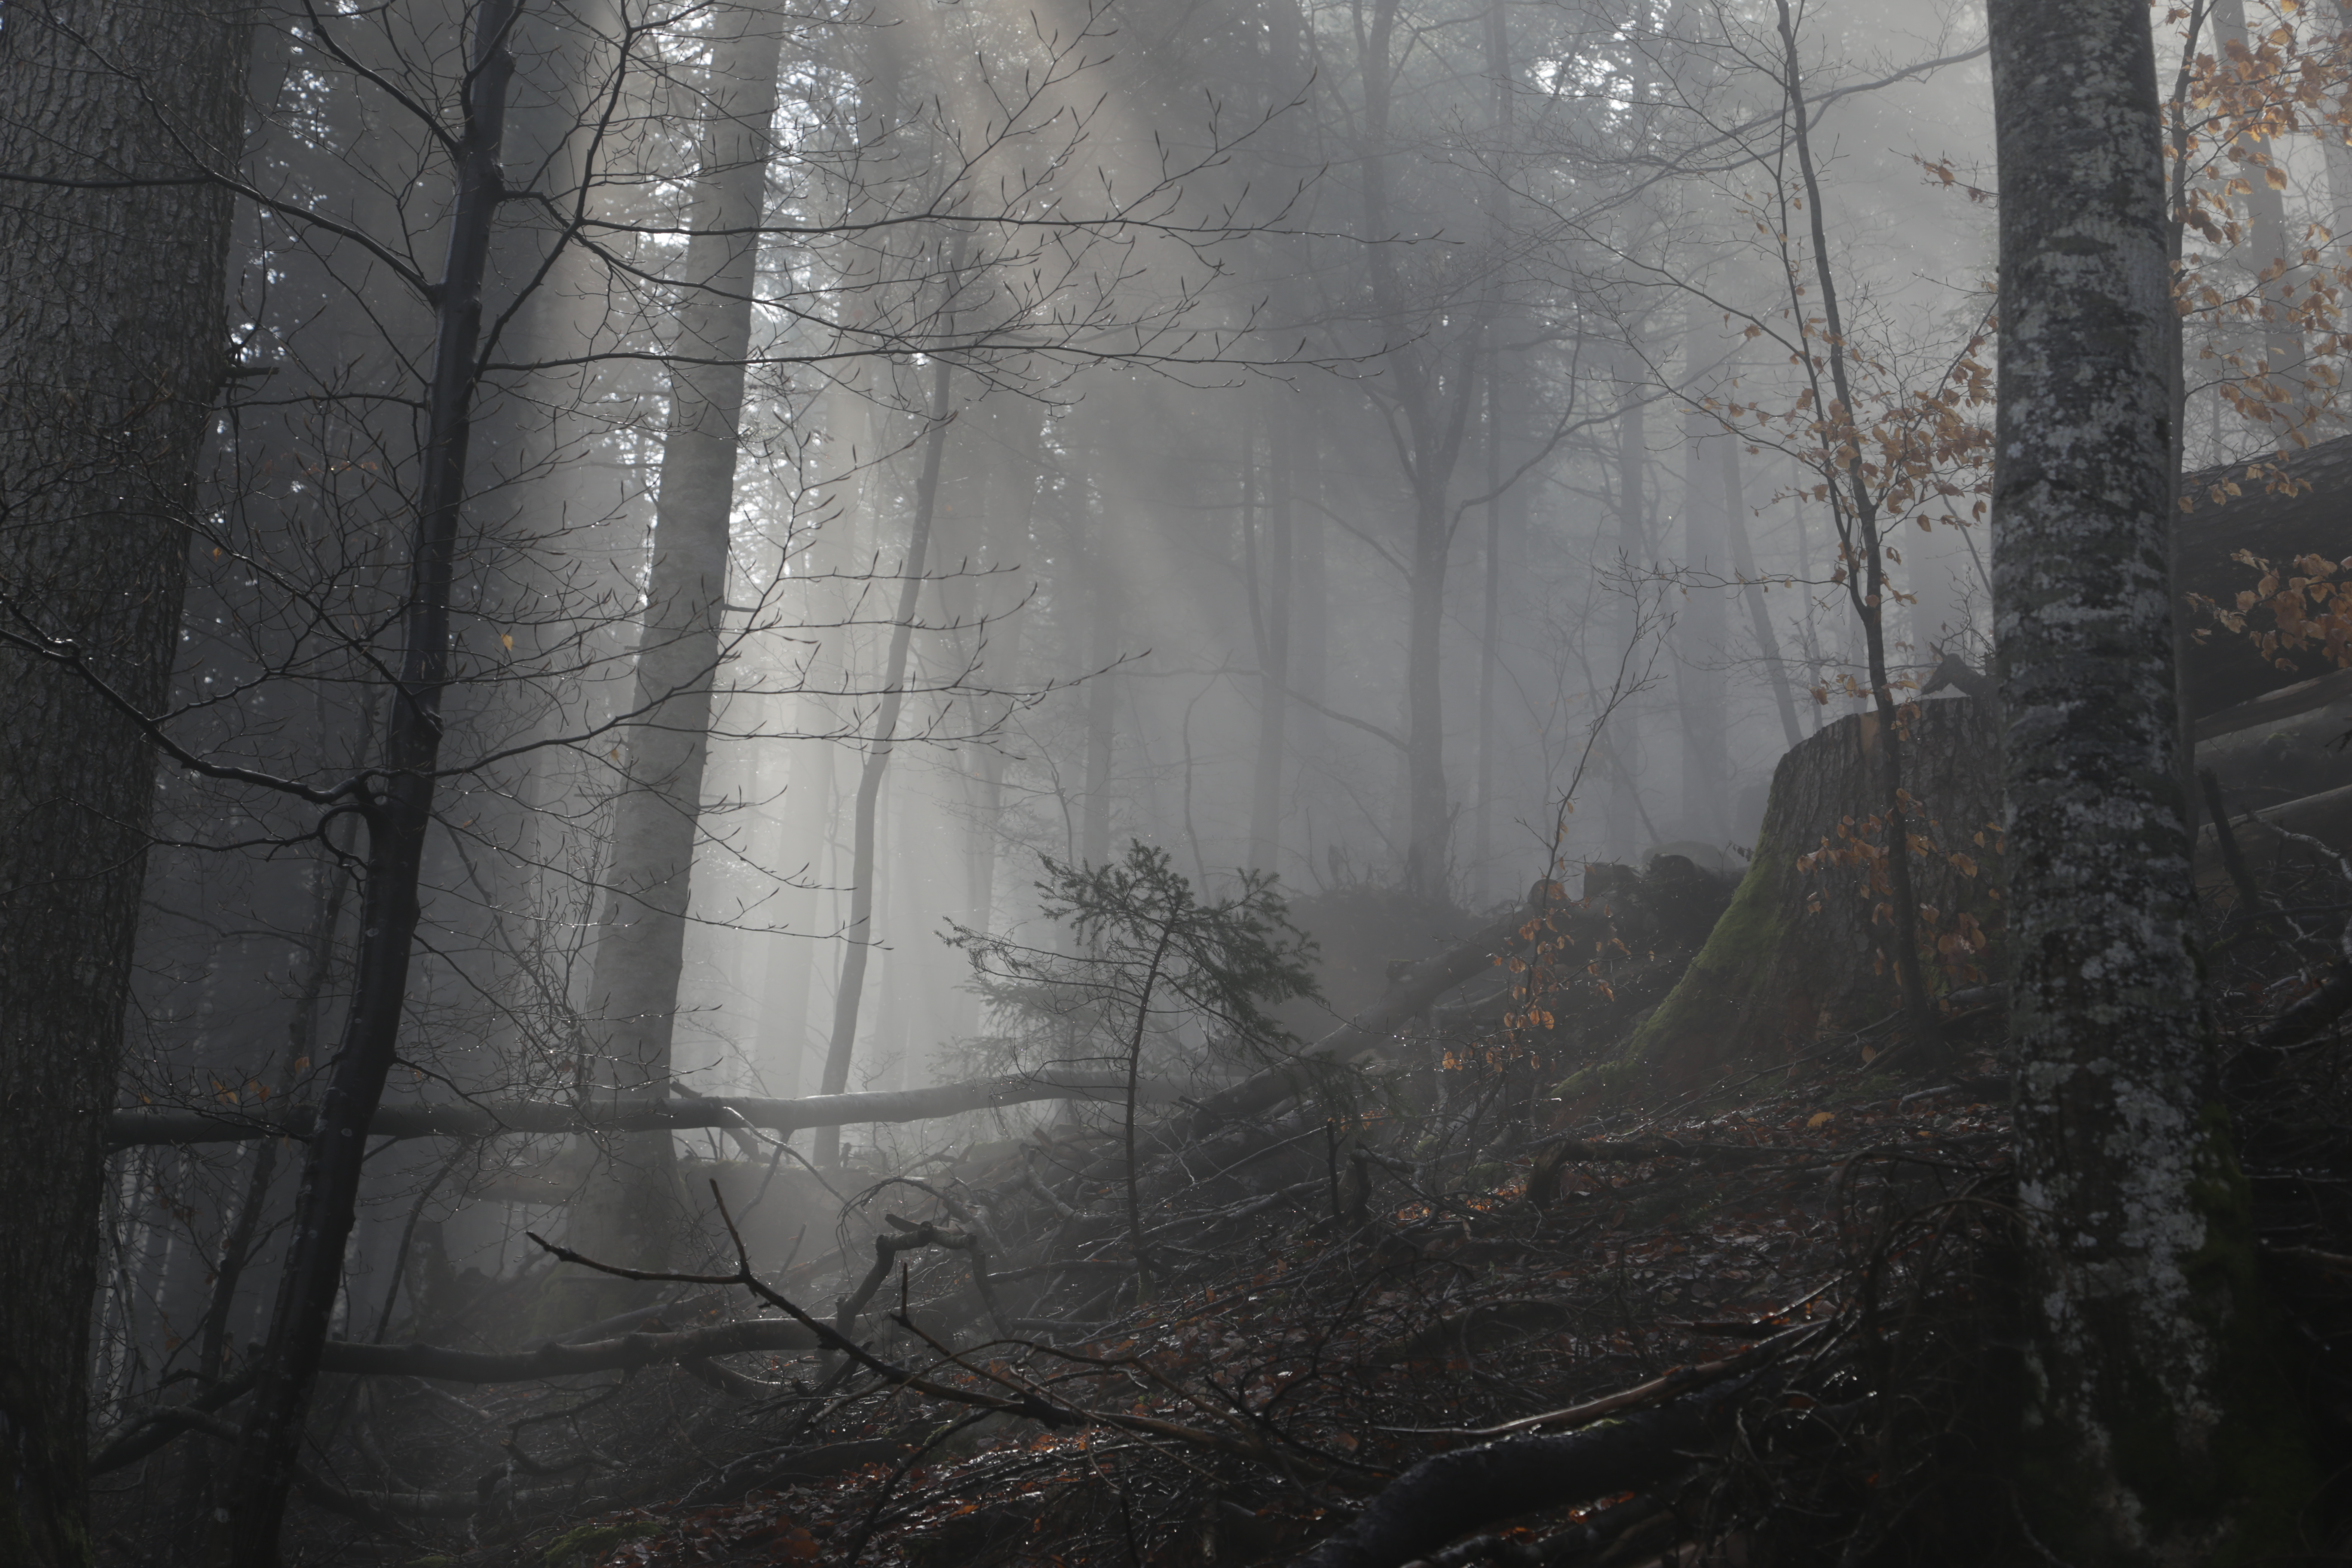 File:Foggy forest (21177709701).jpg - Wikimedia Commons